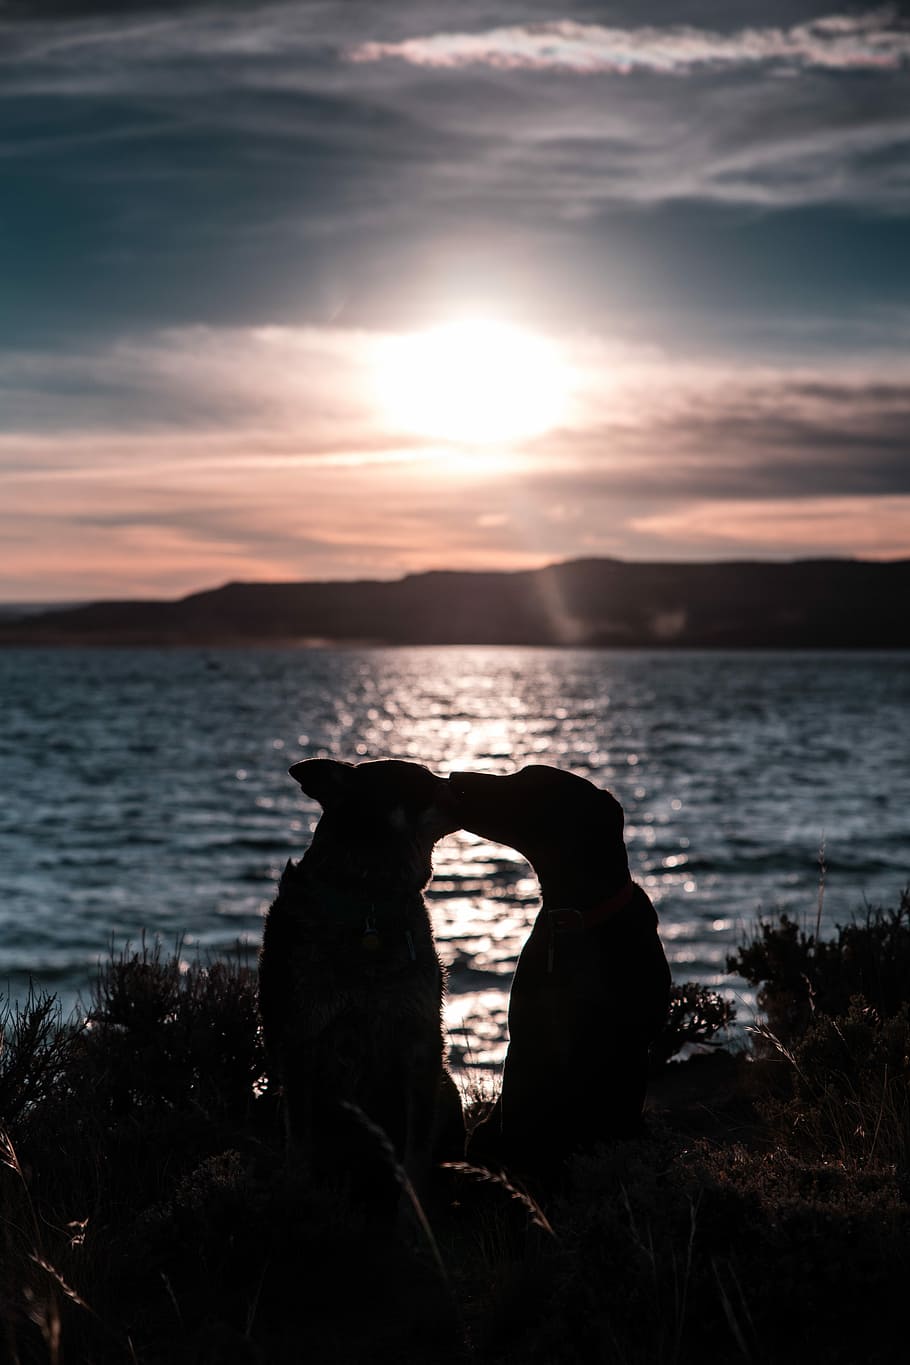 two dog silhouettes under crepuscular rays, silhouette of two dogs kissing beside beach